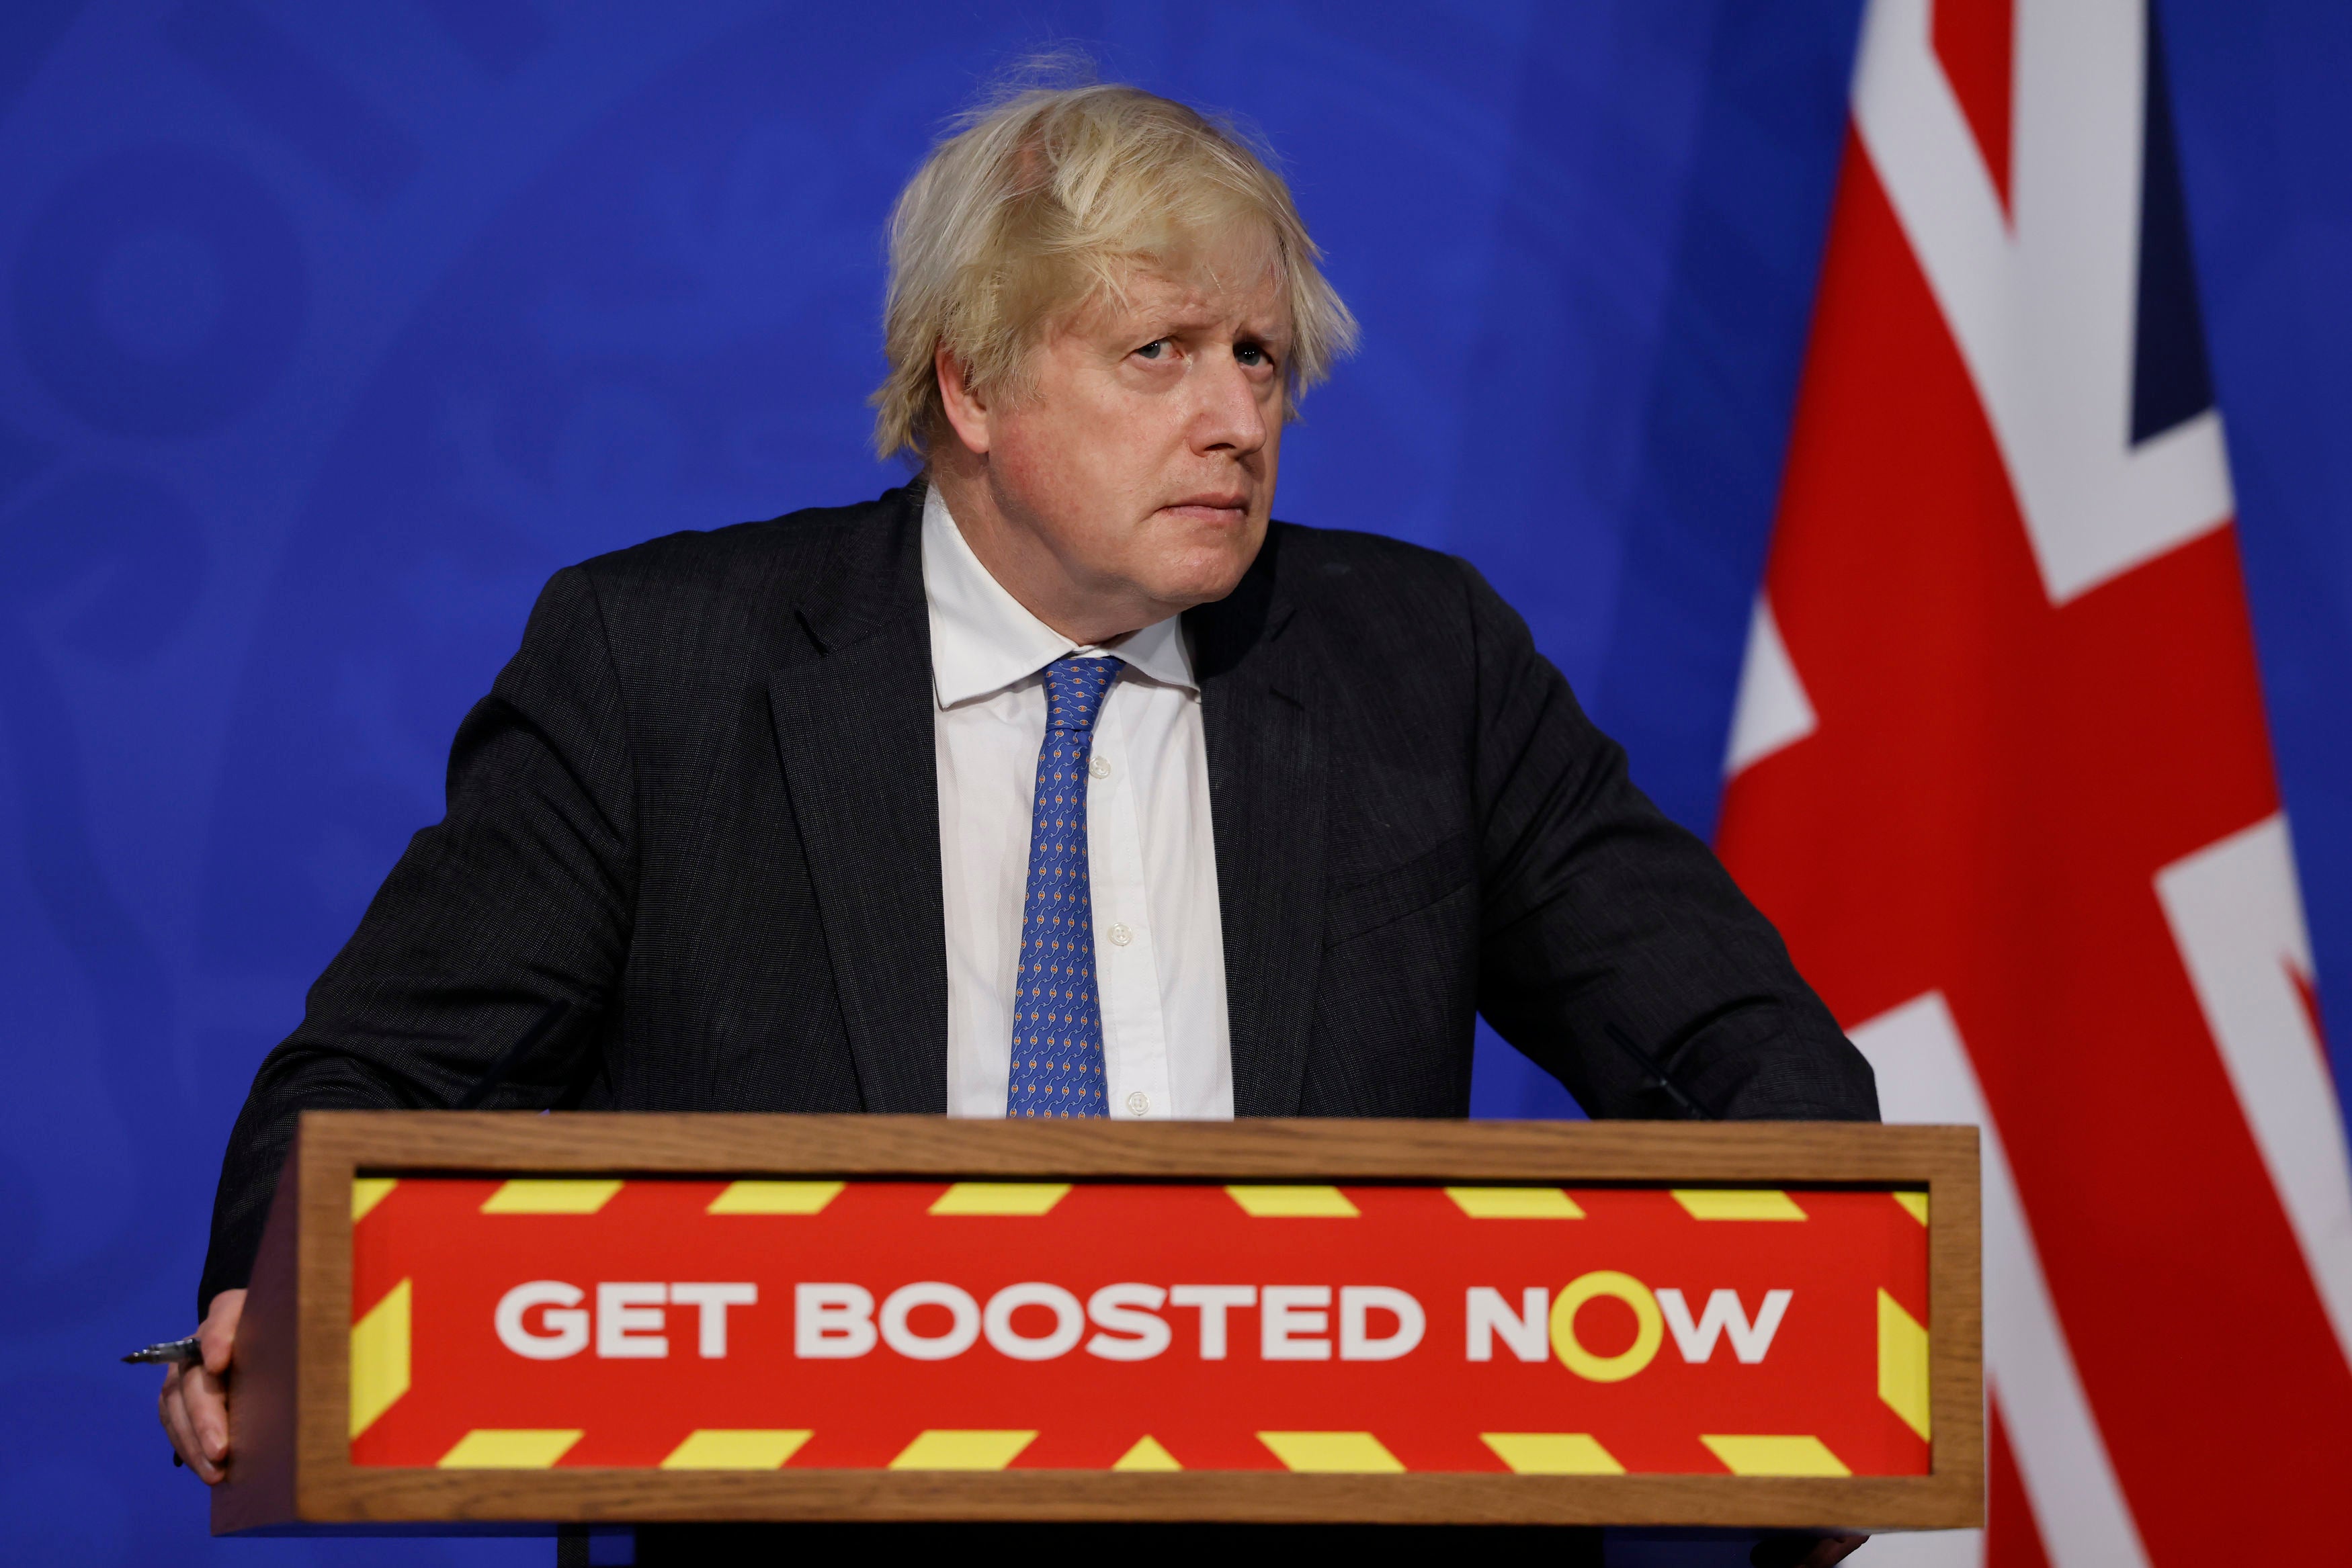 Boris Johnson during a media briefing in Downing Street. The oversized O caused confusion